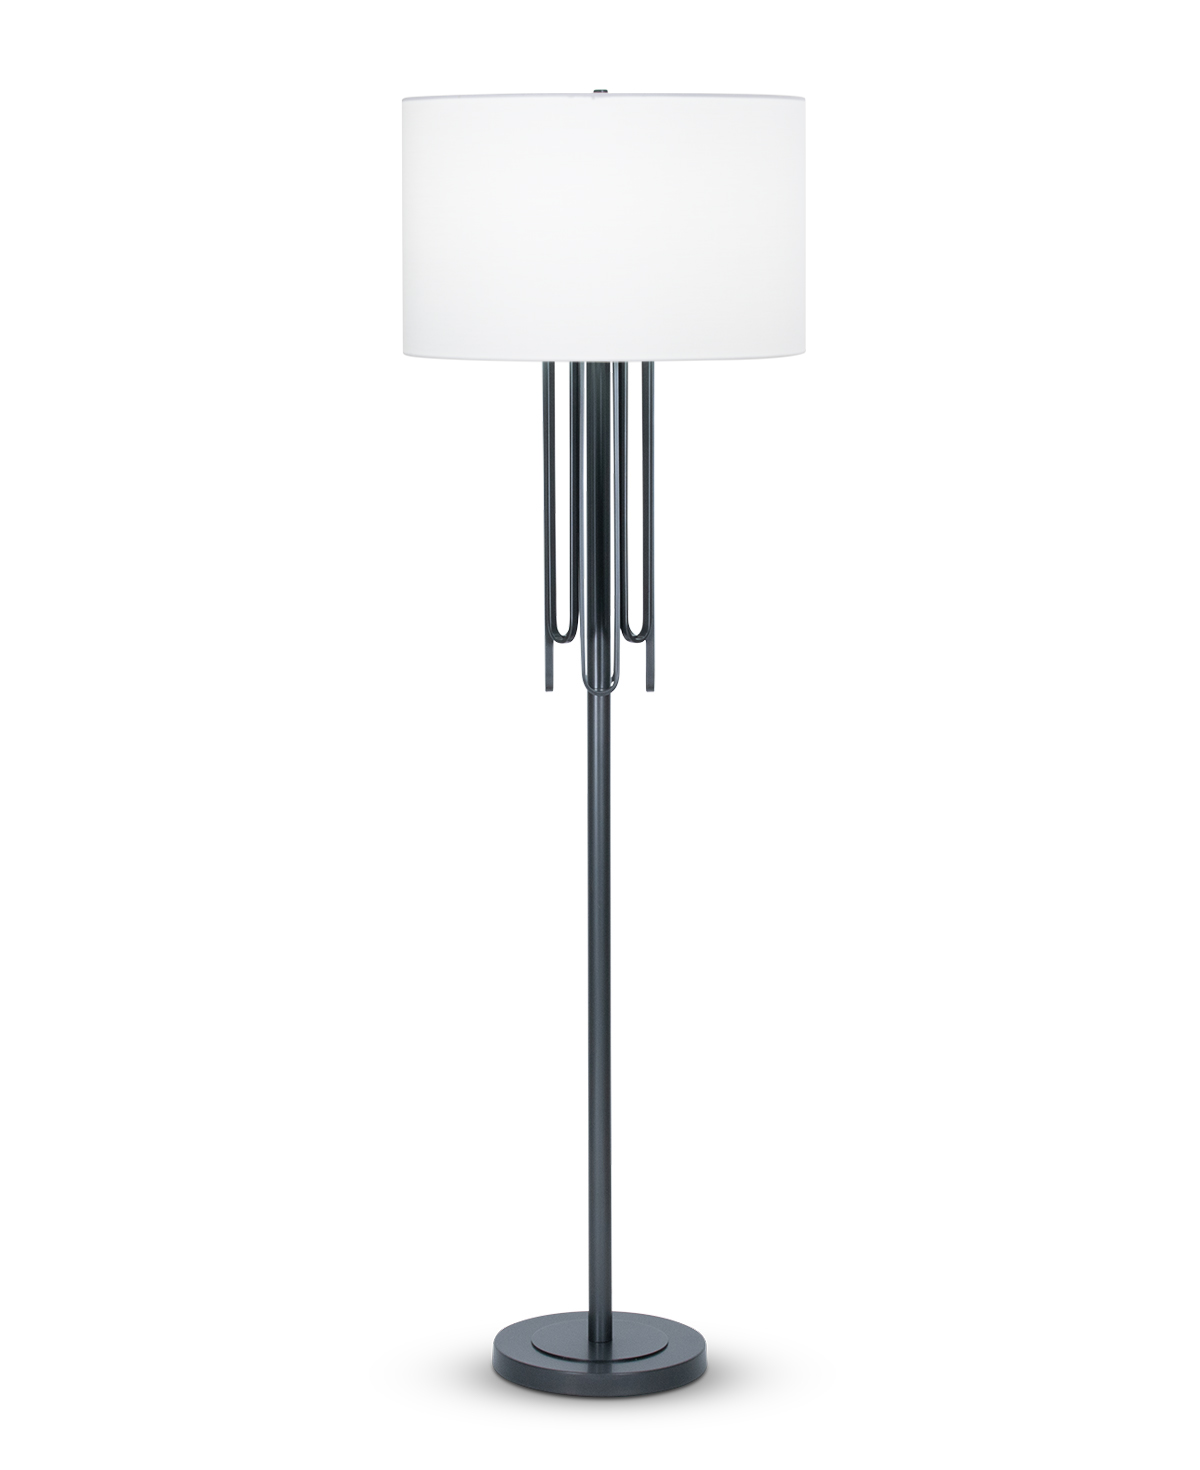 FlowDecor Barclay Floor Lamp in metal with bronze finish and off-white cotton drum shade (# 4489)